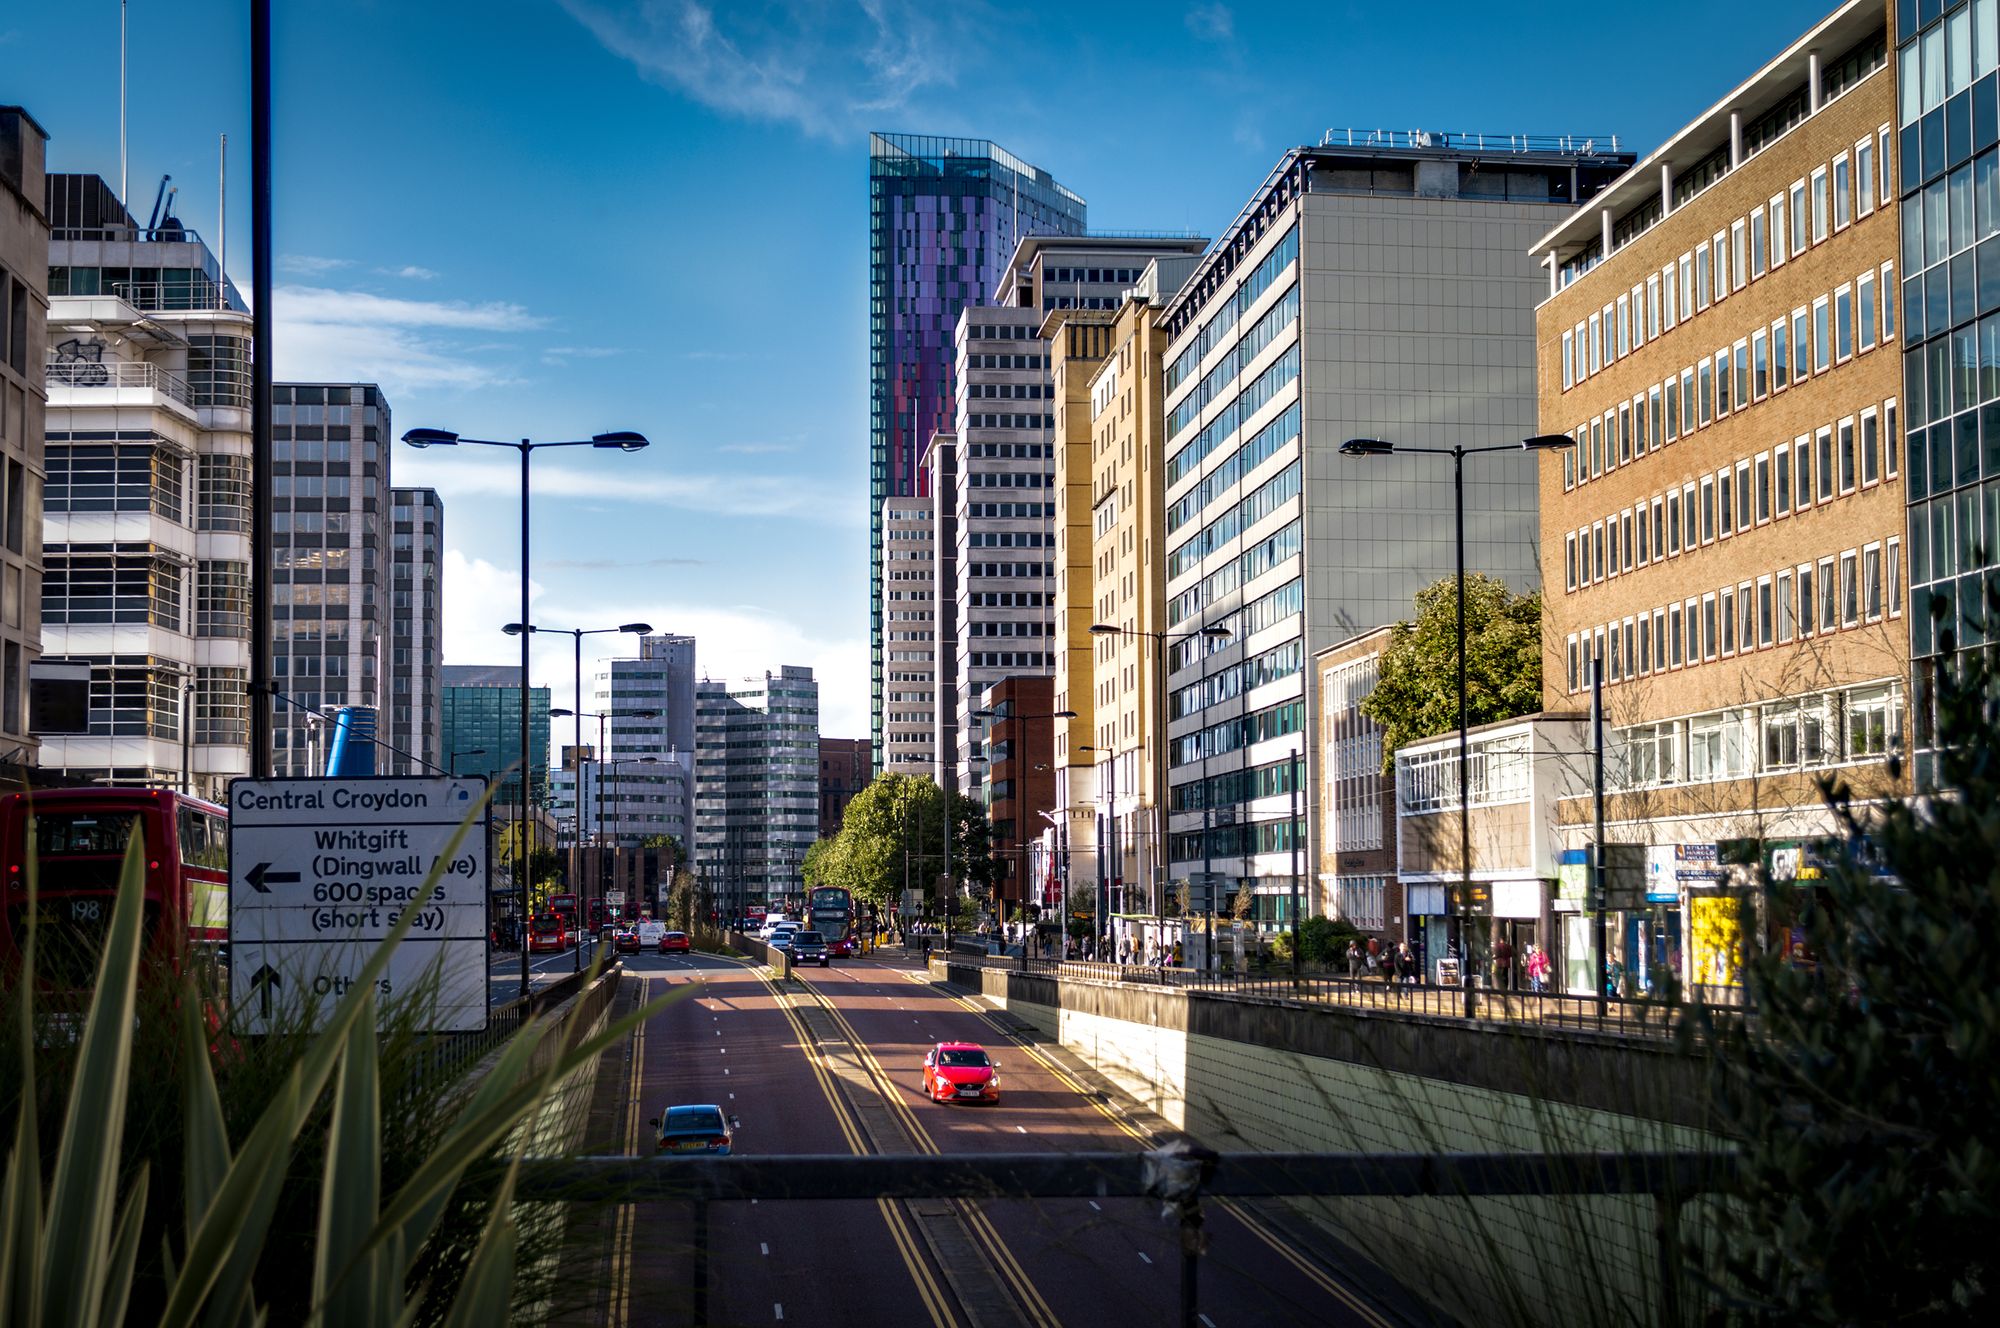 Croydon Area Guide - Local Information, Transport, Dining Out, Leisure